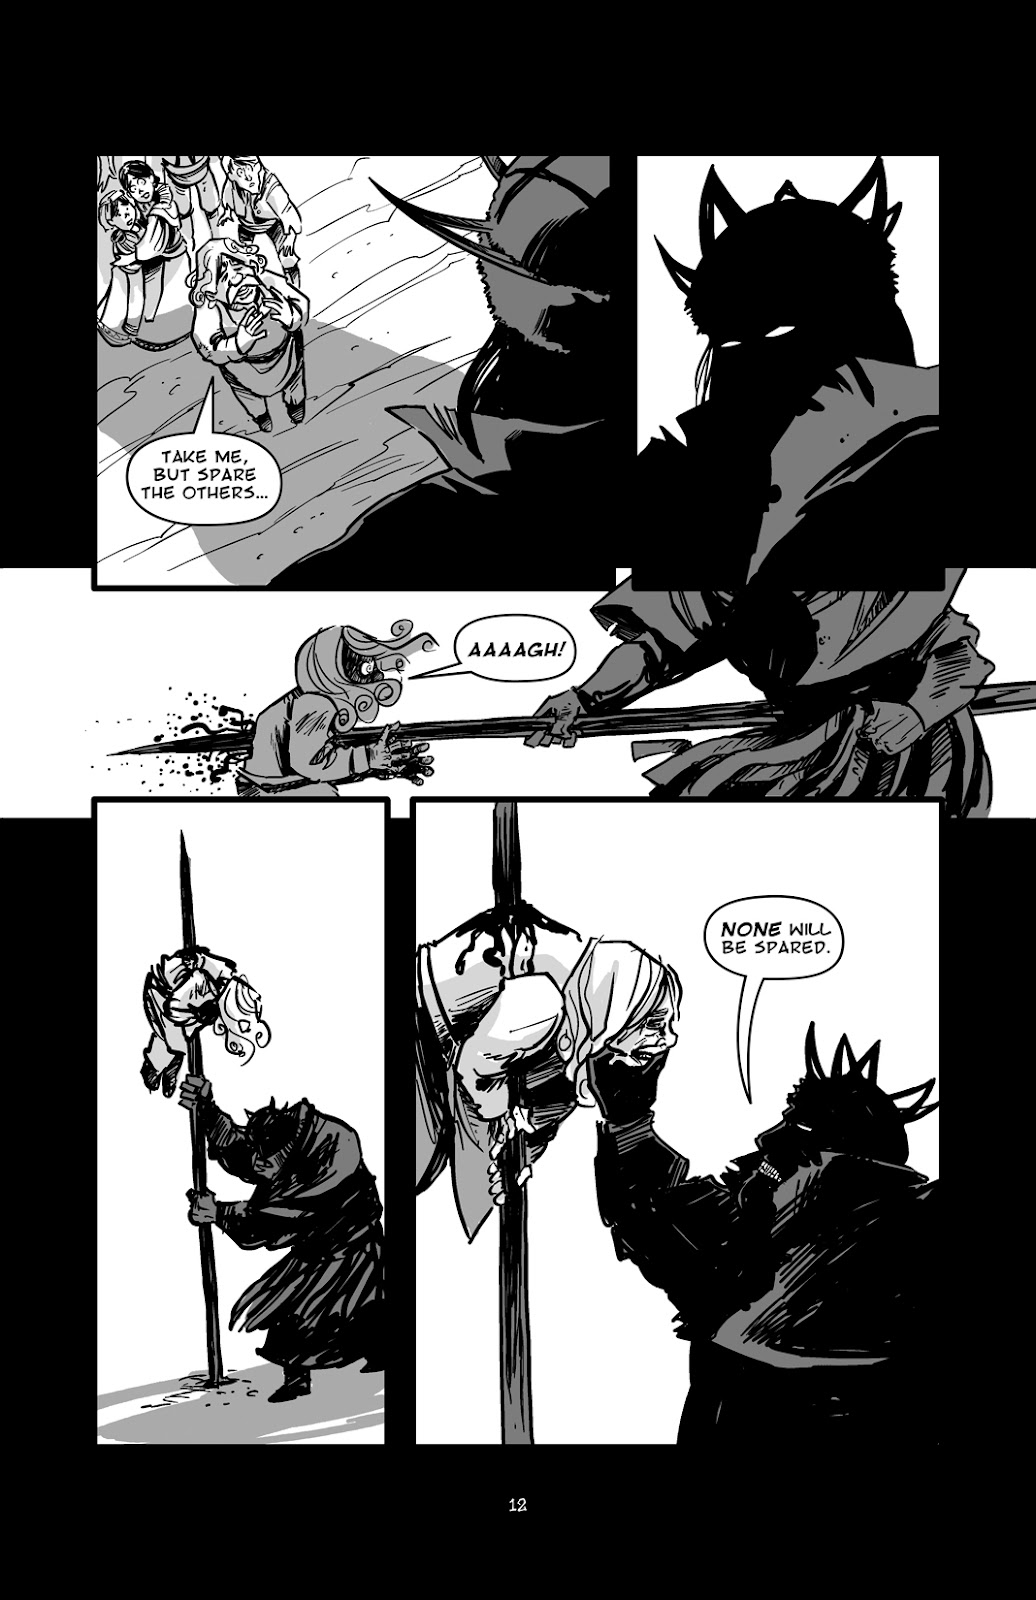 Pinocchio: Vampire Slayer - Of Wood and Blood issue 1 - Page 13